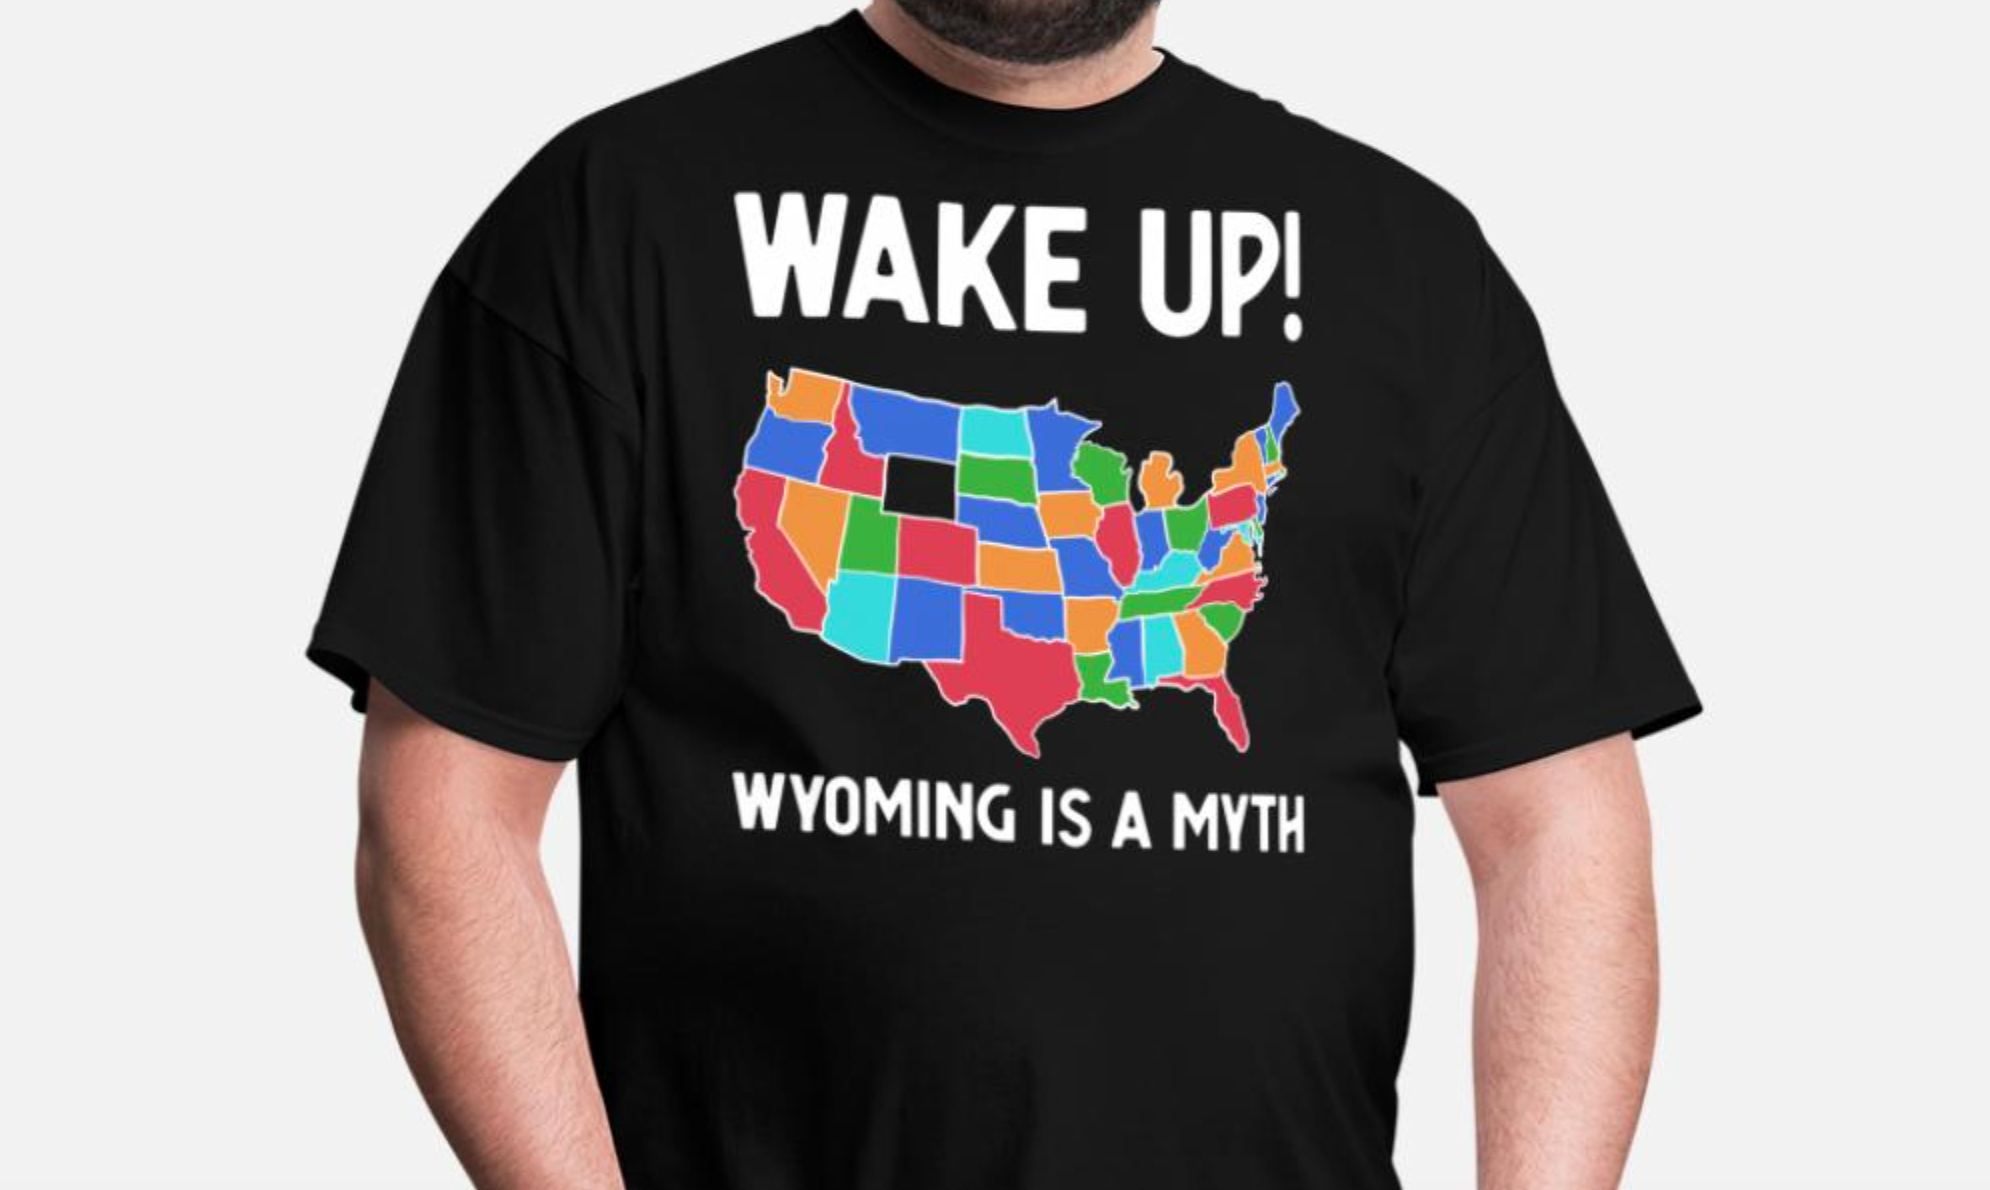 Wake up wyoming is a myth men's t-shirt.